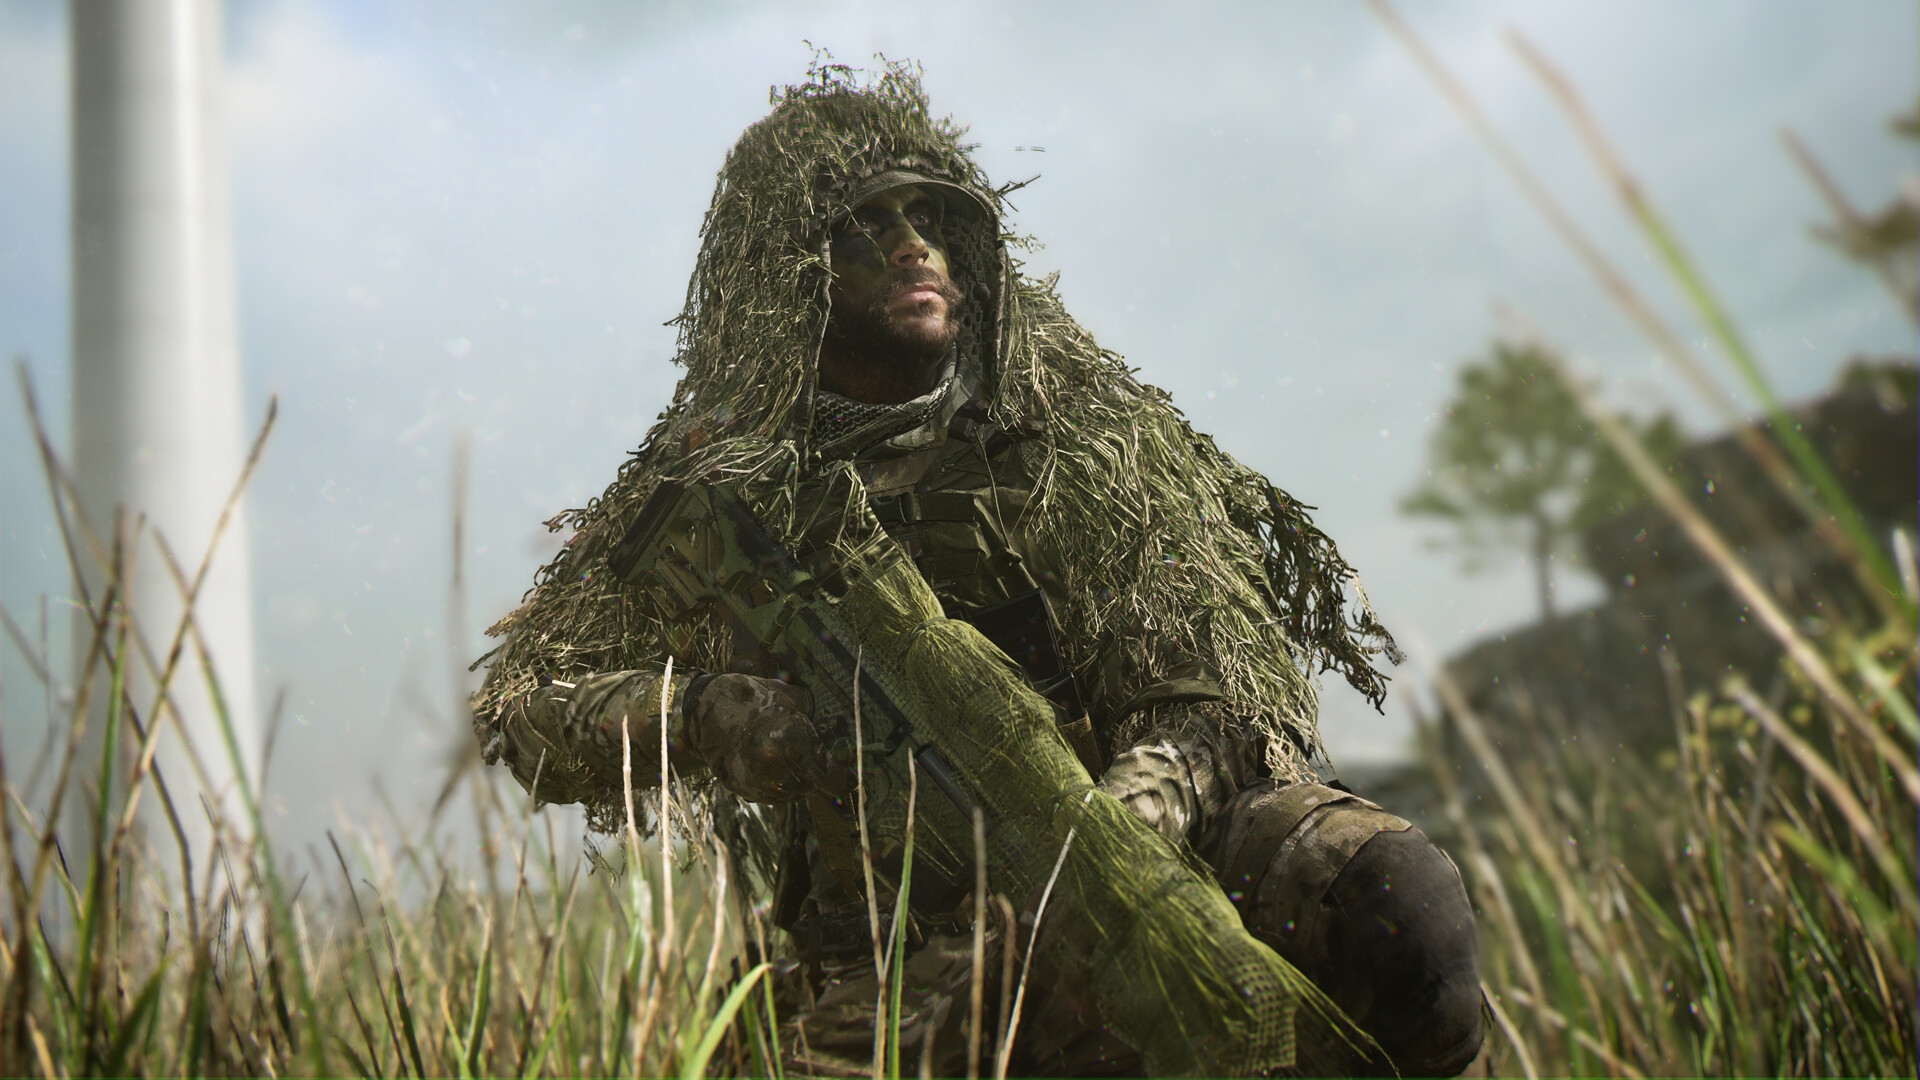 In this article, we are going to be covering the Modern Warfare 2 campaign length: How long is the MW2 campaign, so you know exactly how much single-player...